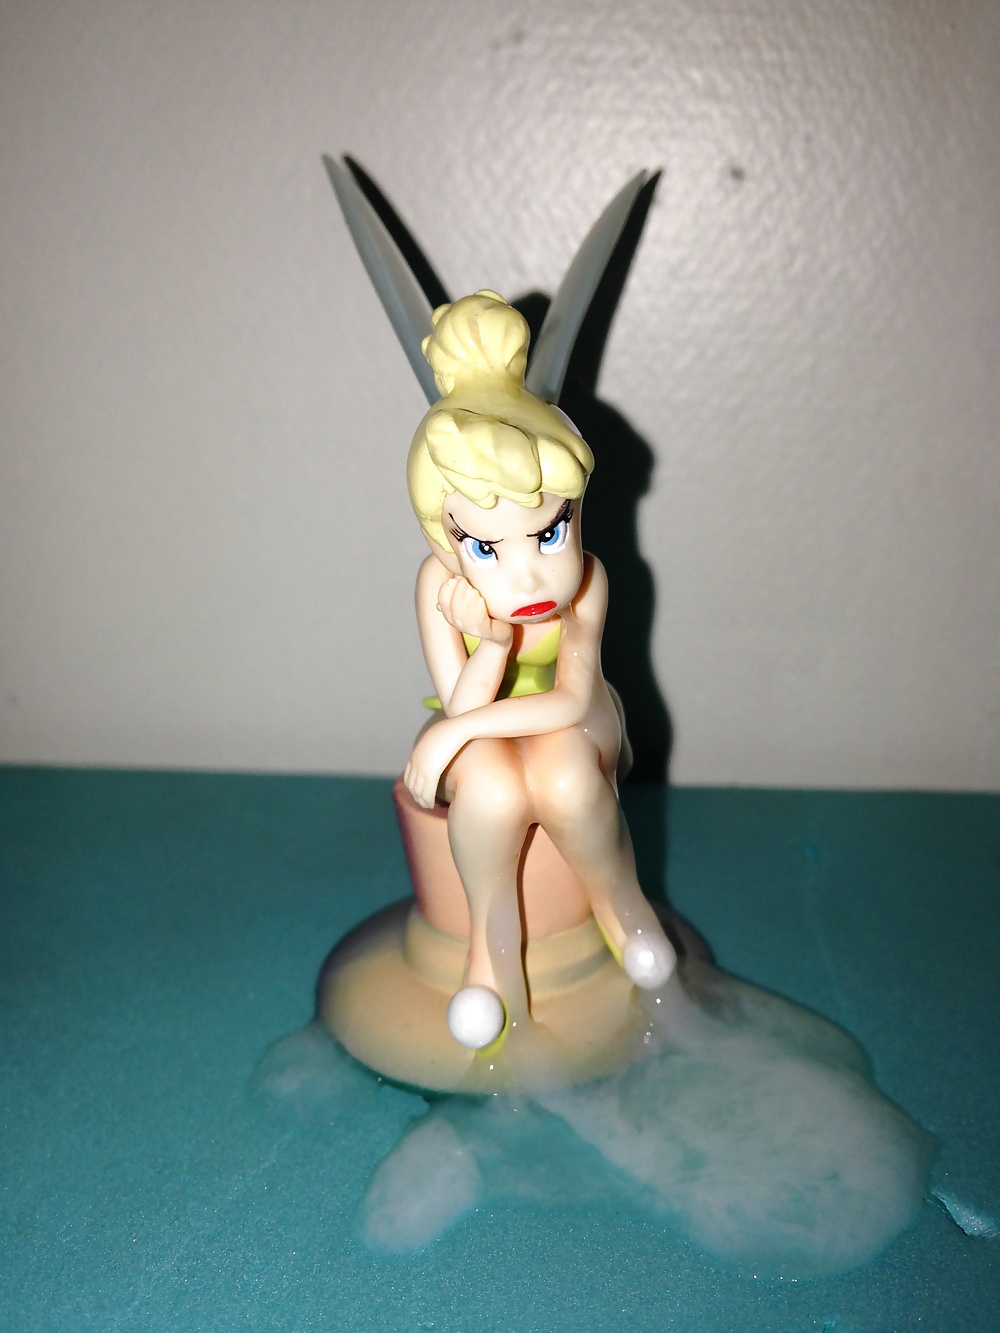 Sassy Tinkerbell  covered in cum #30168481